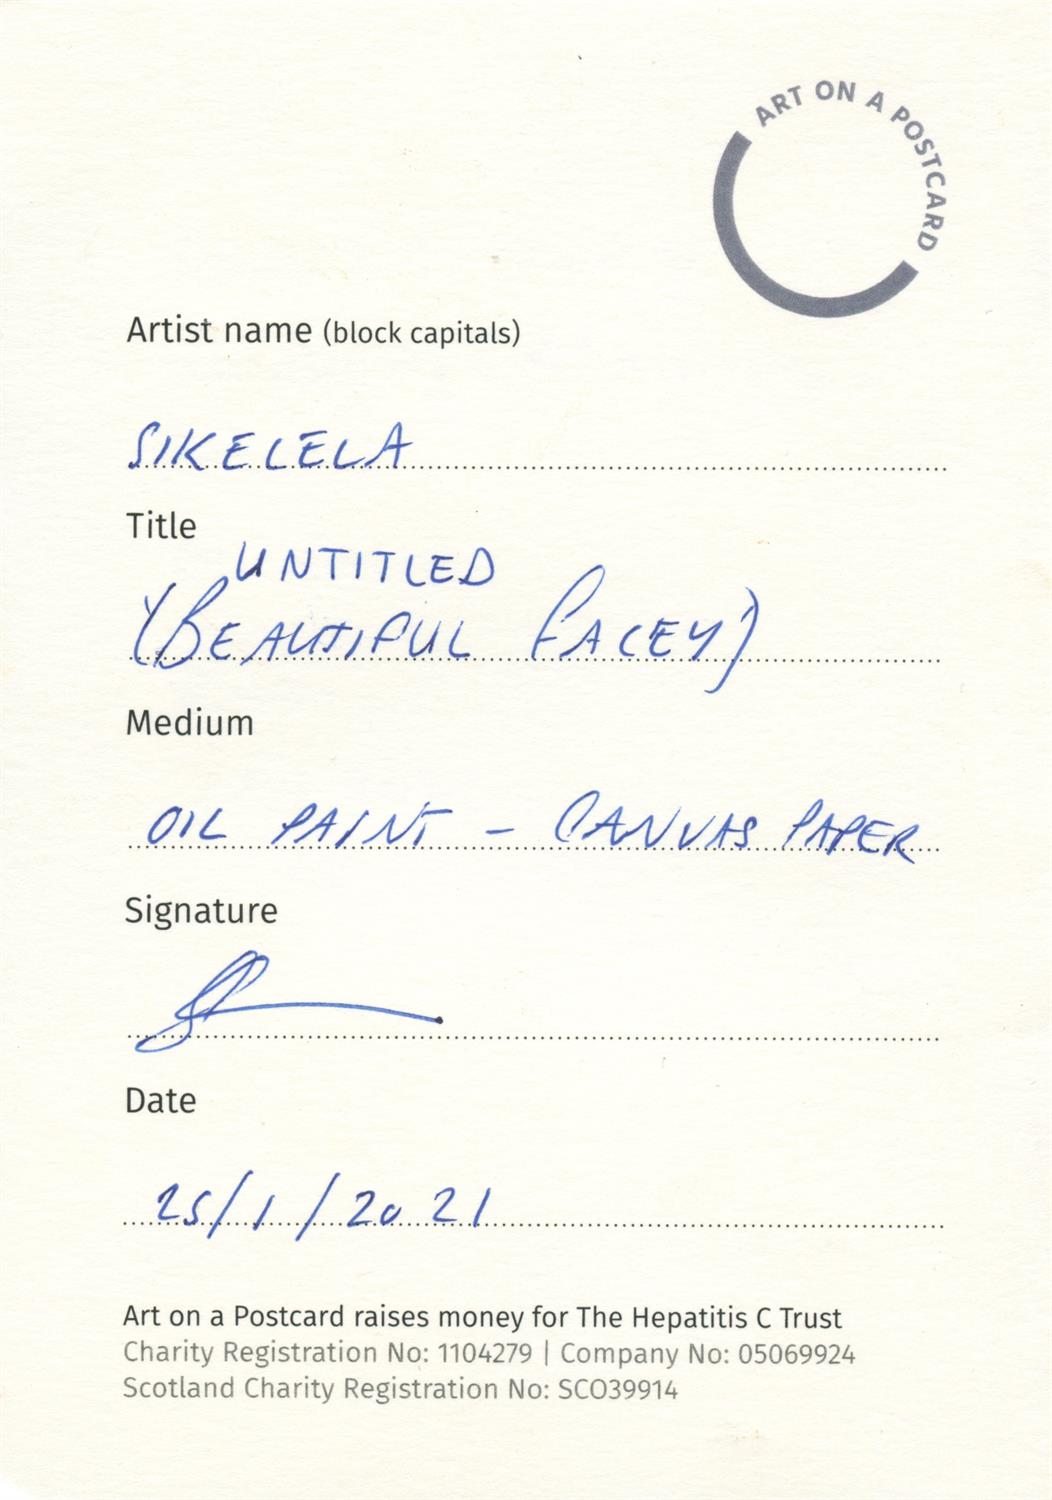 Sikelela Owen, Untitled (Beautiful Facey), 2021 - Image 2 of 3